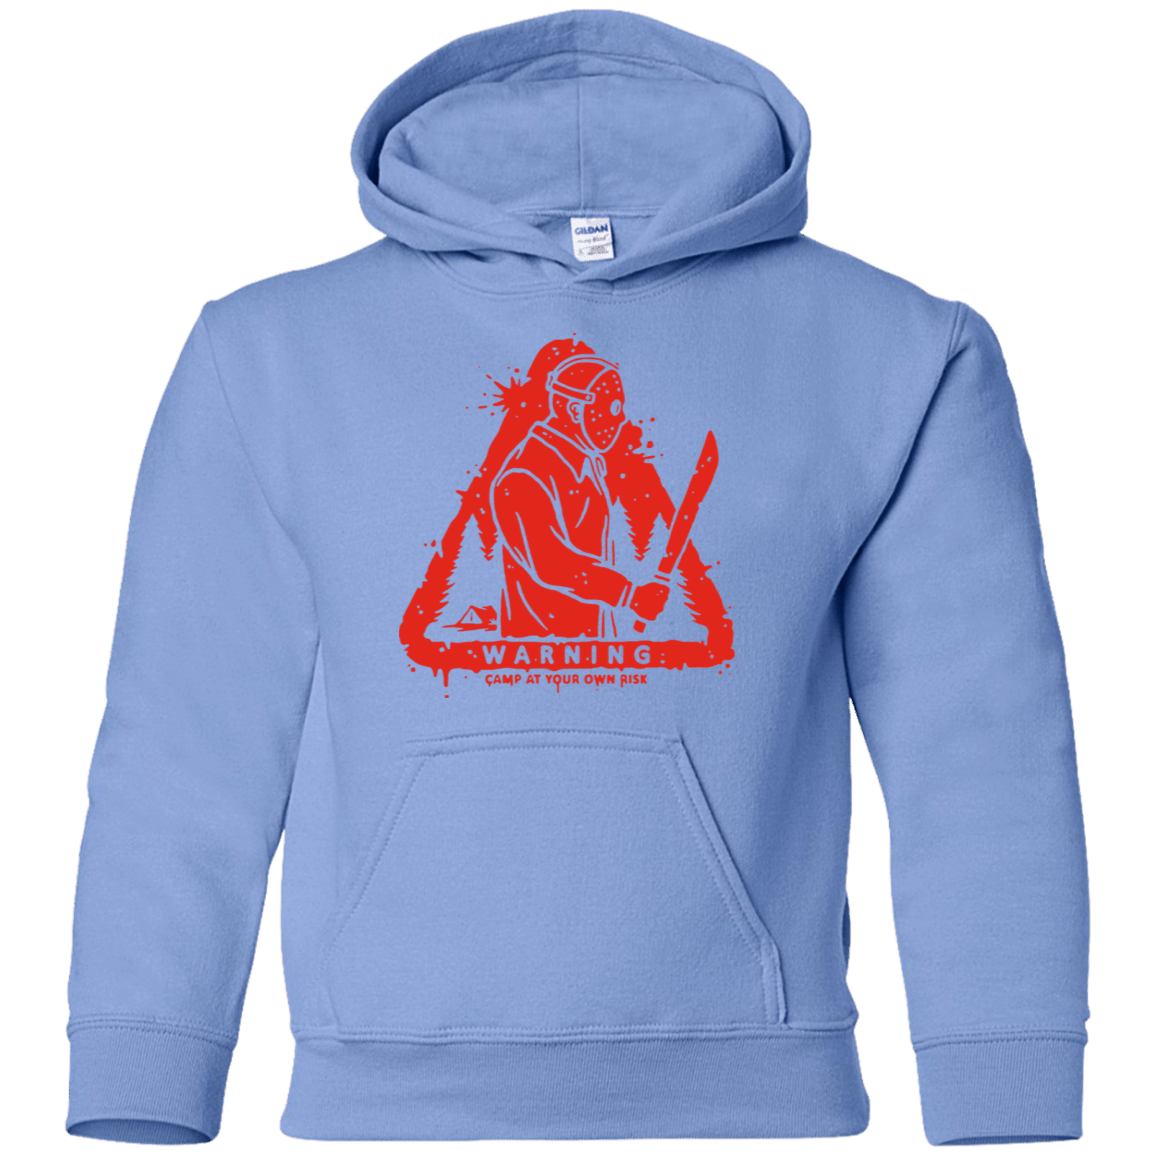 Sweatshirts Carolina Blue / YS Camp at Your Own Risk Youth Hoodie